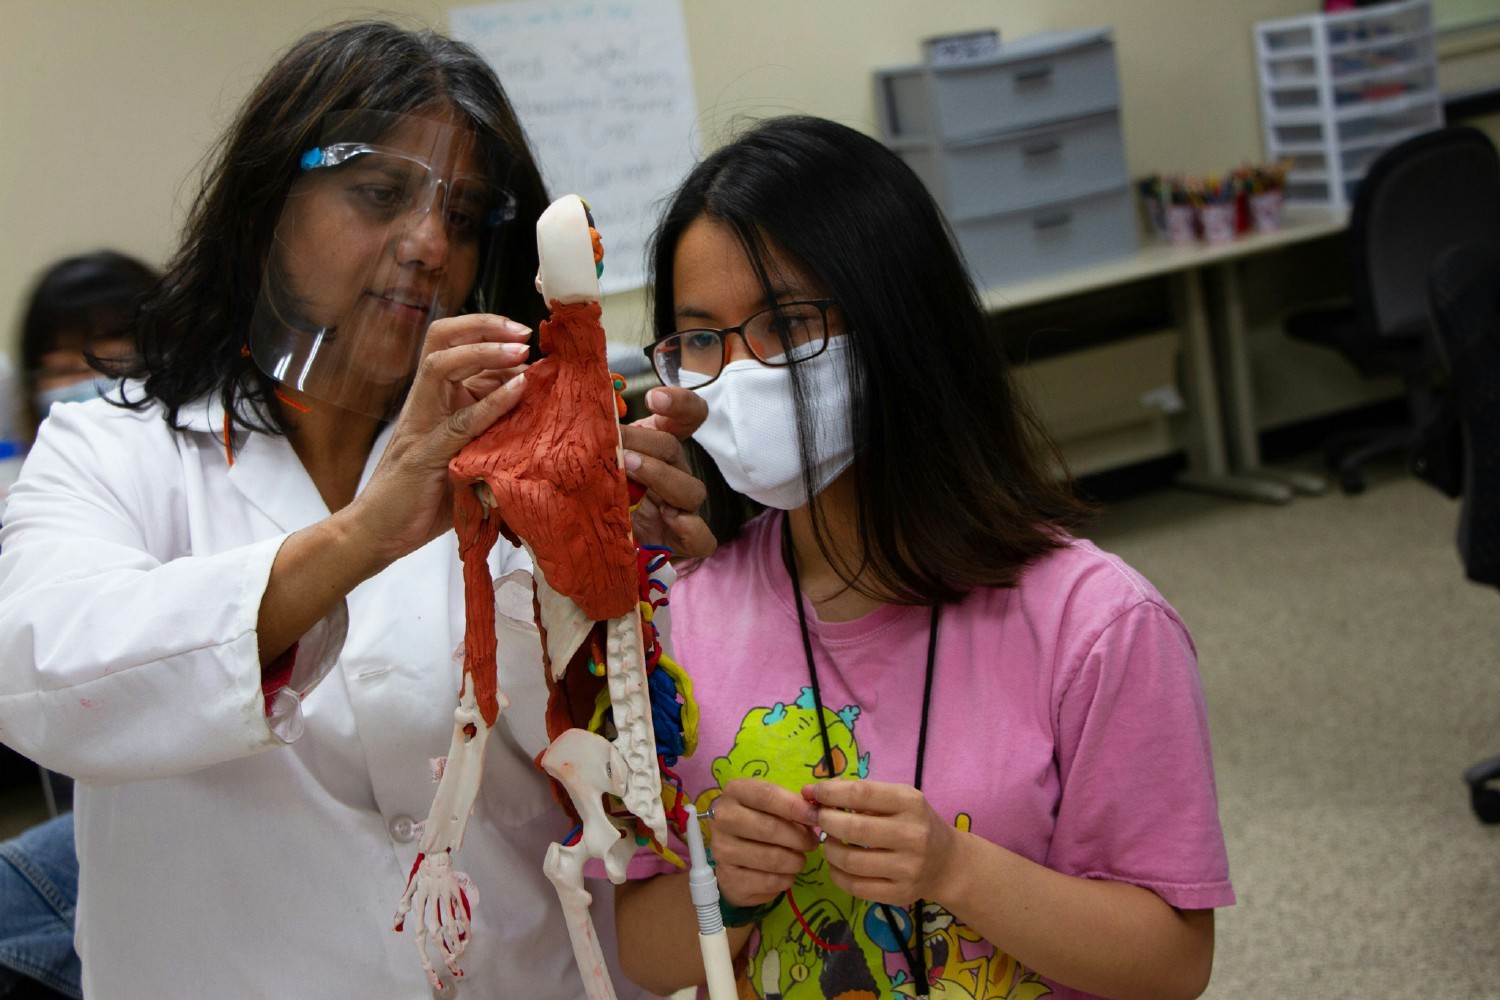 INSTRUCTOR PROVIDES GUIDANCE FOR BIO-MEDICAL STUDENT